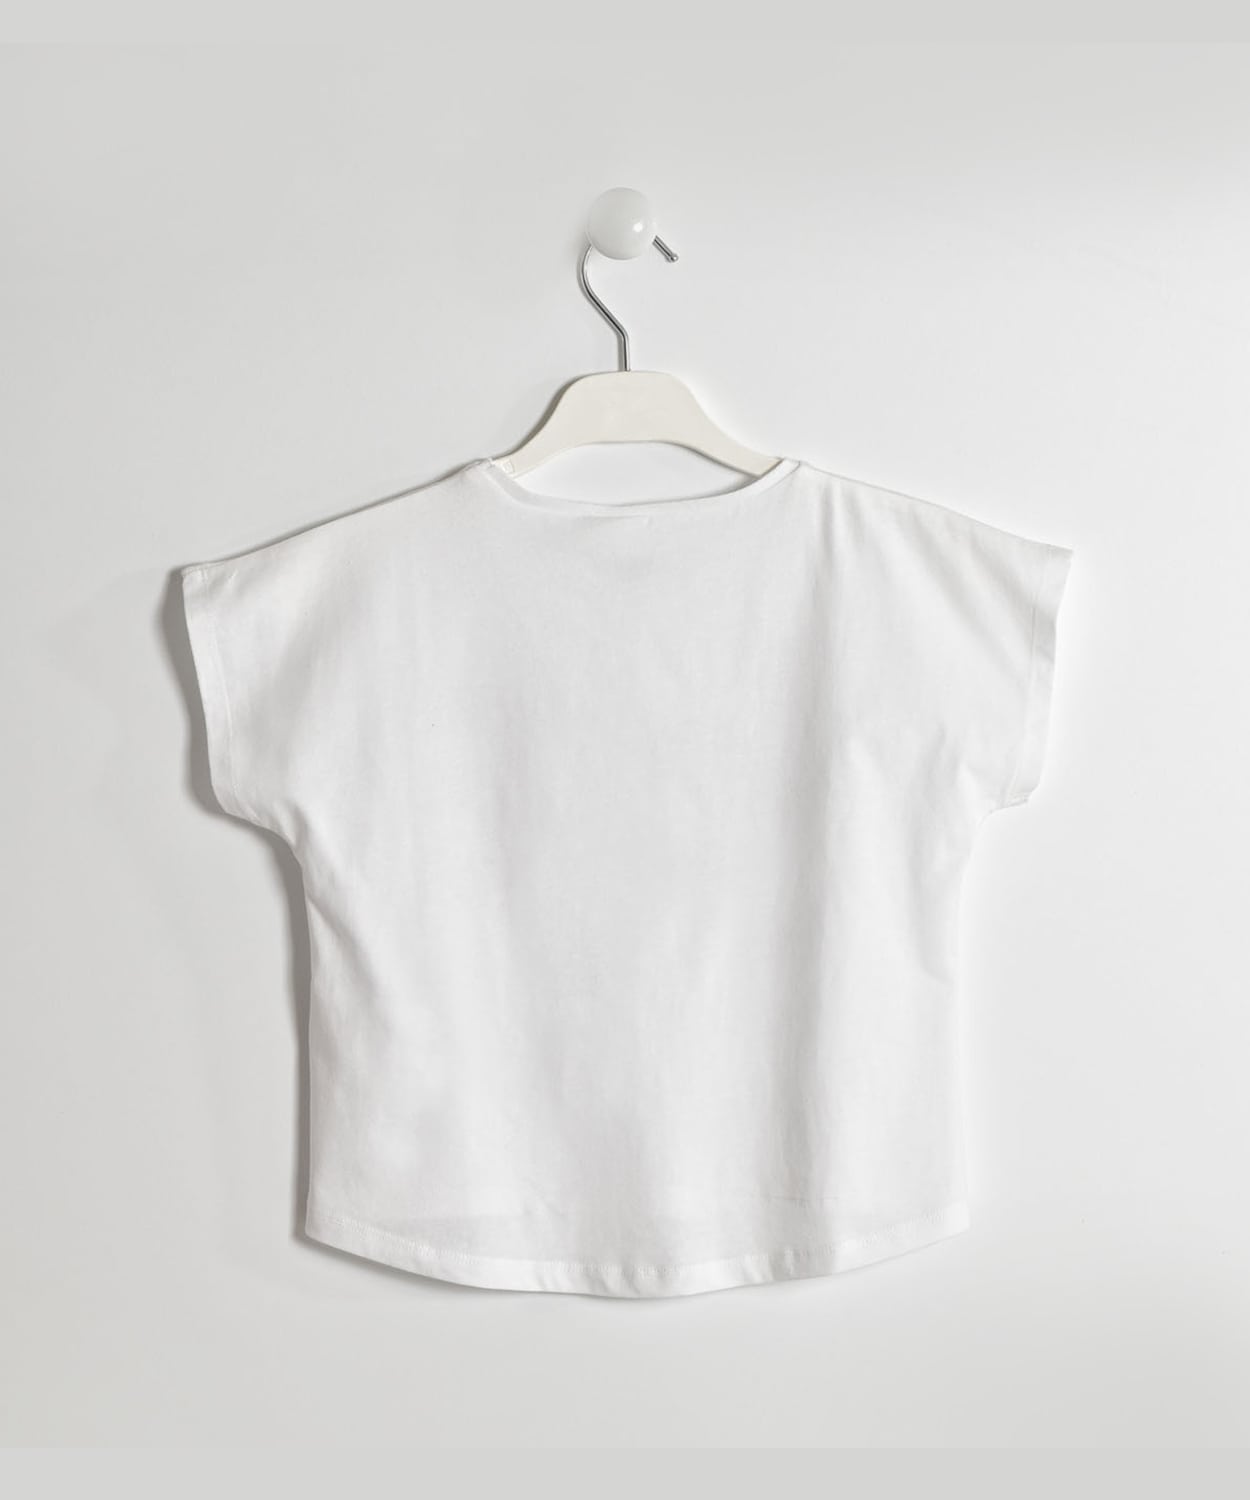 Buy Girls White Cotton T-Shirt Online from iDO - Little Tags